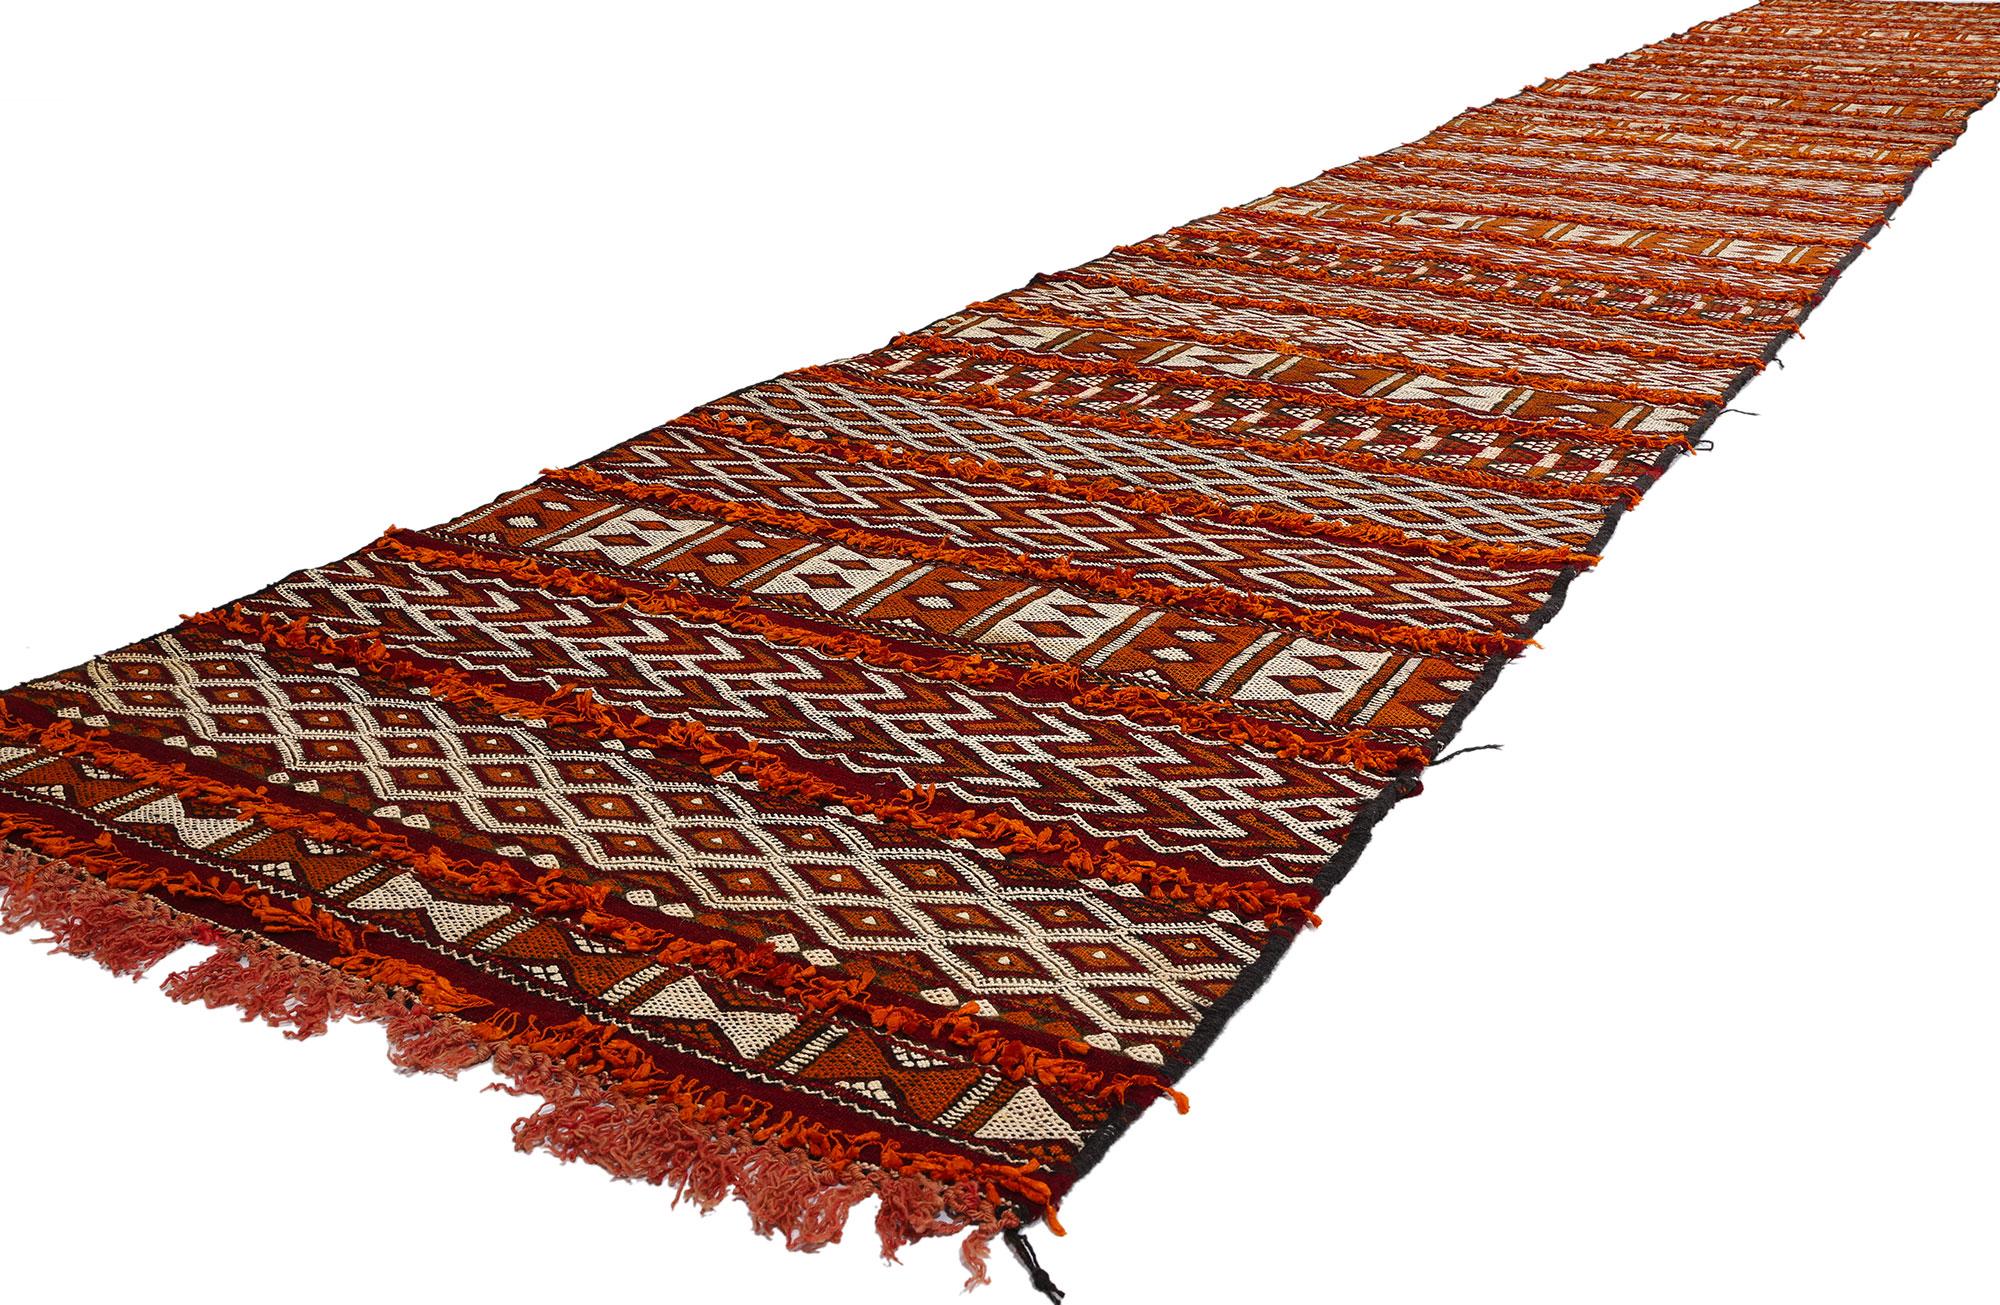 Hand-Woven Midcentury Bohemian Vintage Moroccan Zemmour Kilim Berber Rug, 03'02 x 23'02 For Sale